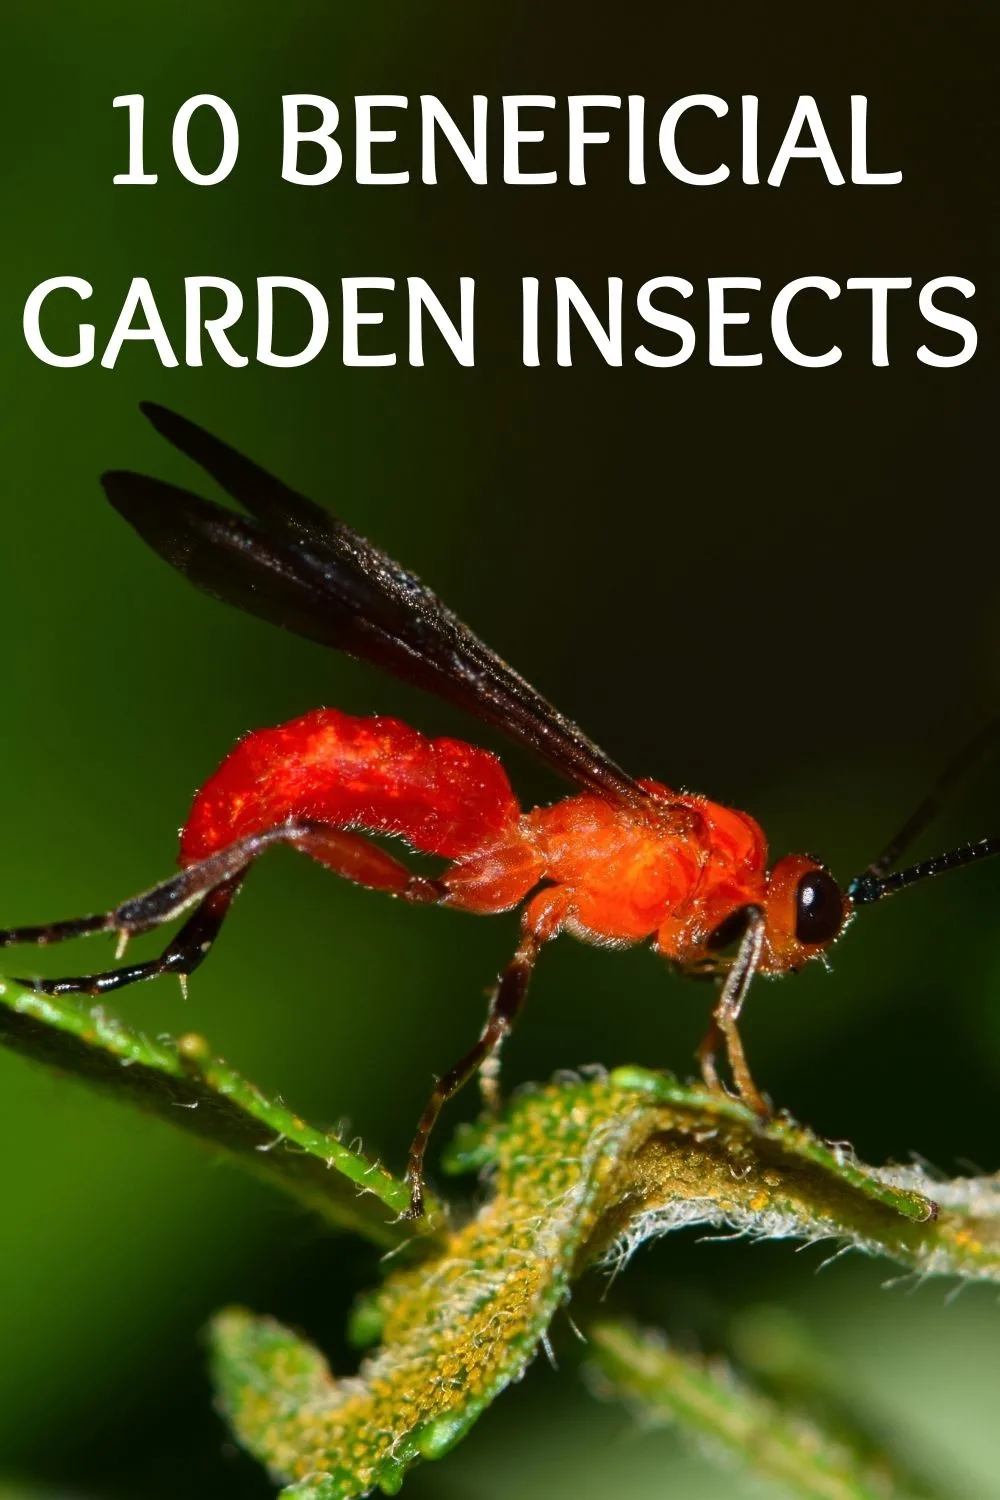 10 beneficial garden insects